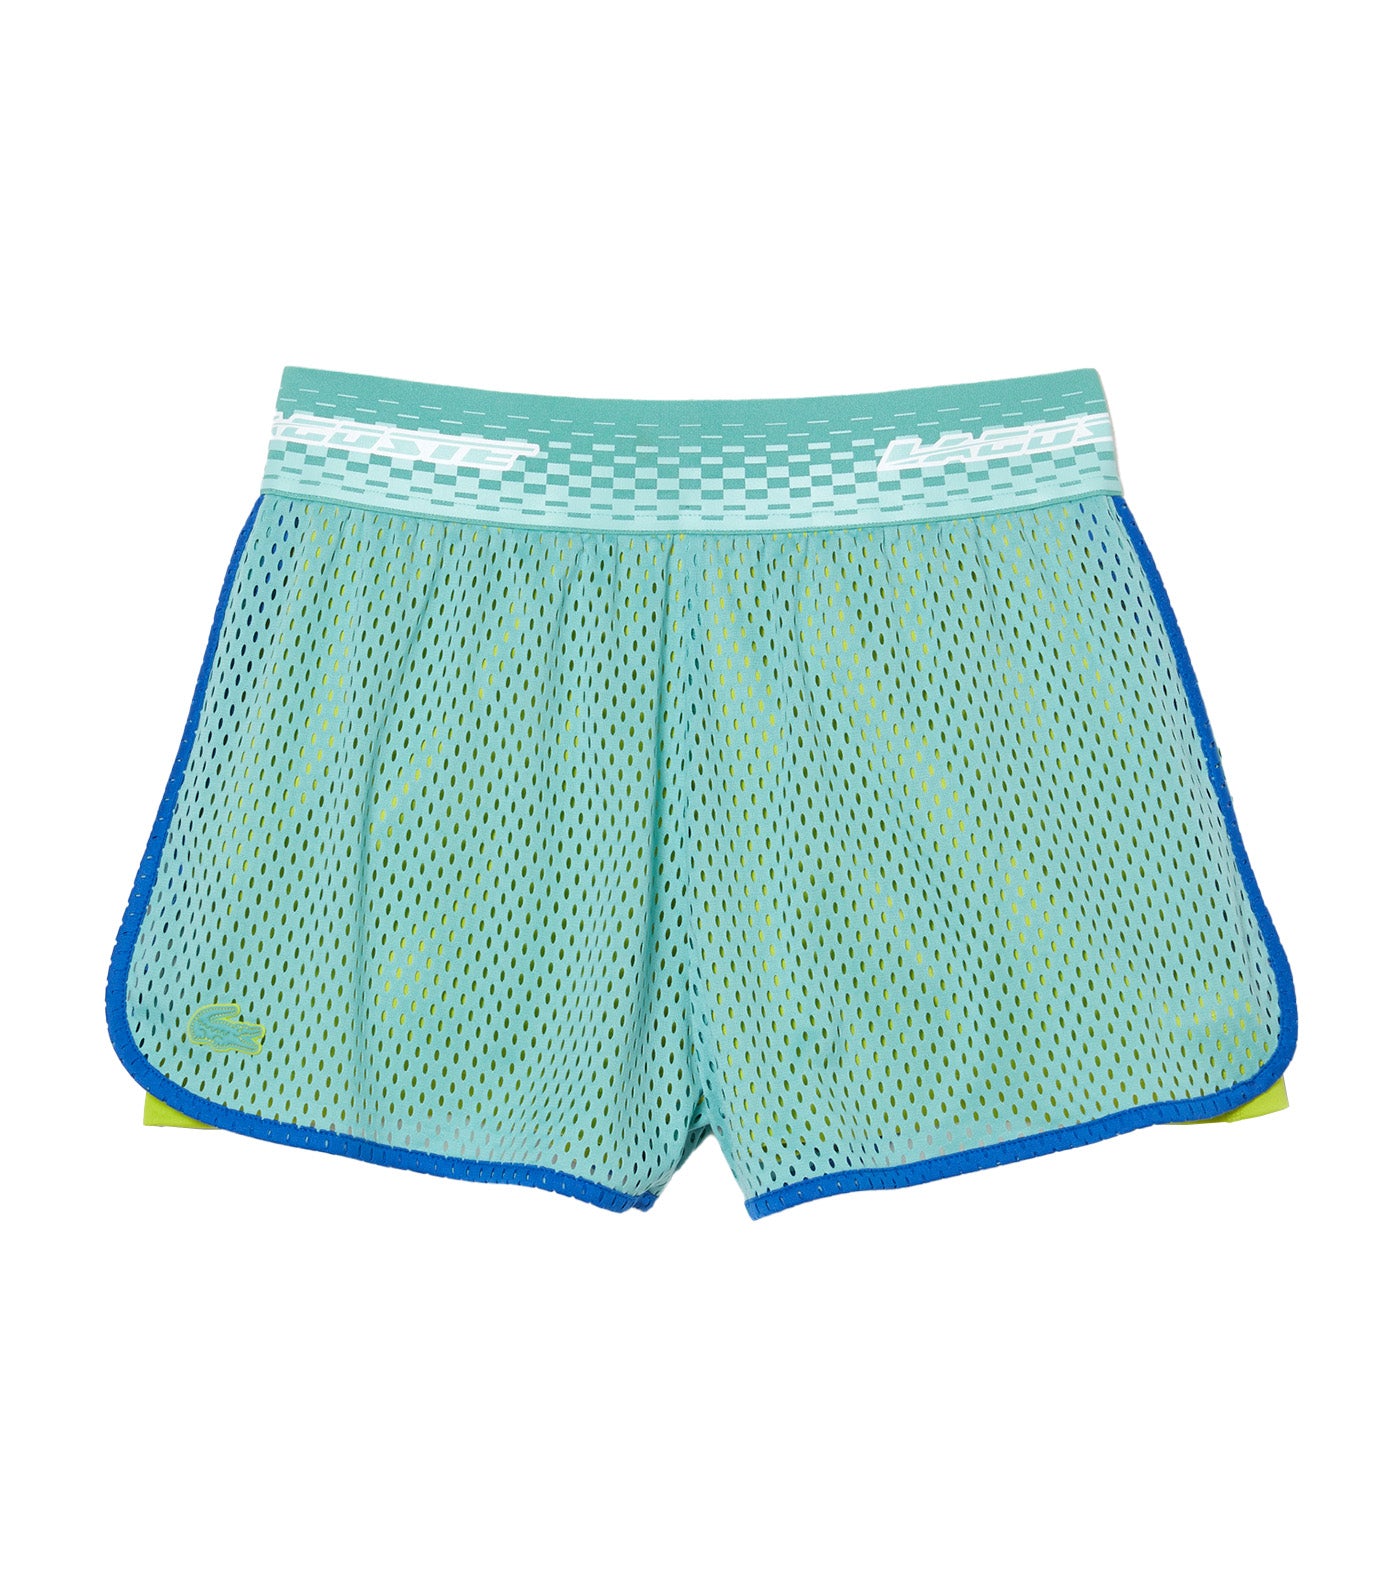 Women’s Tennis Shorts with Built-in Undershorts Florida/Lima